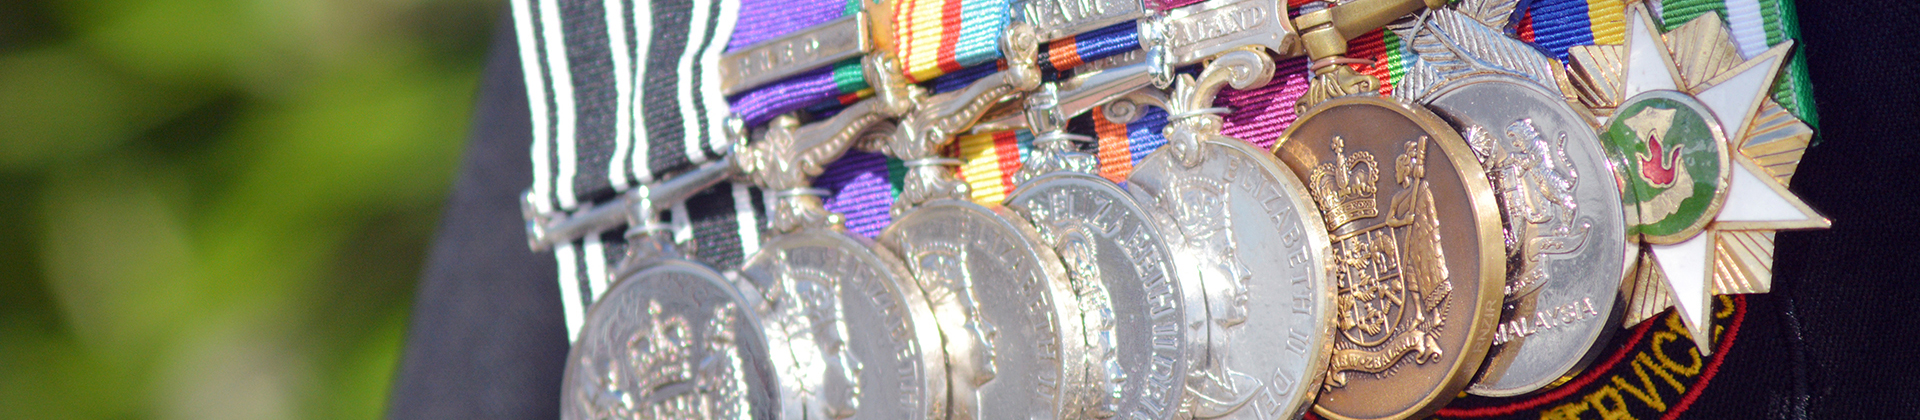 US ARMY DISTINGUISHED SERVICE MEDAL